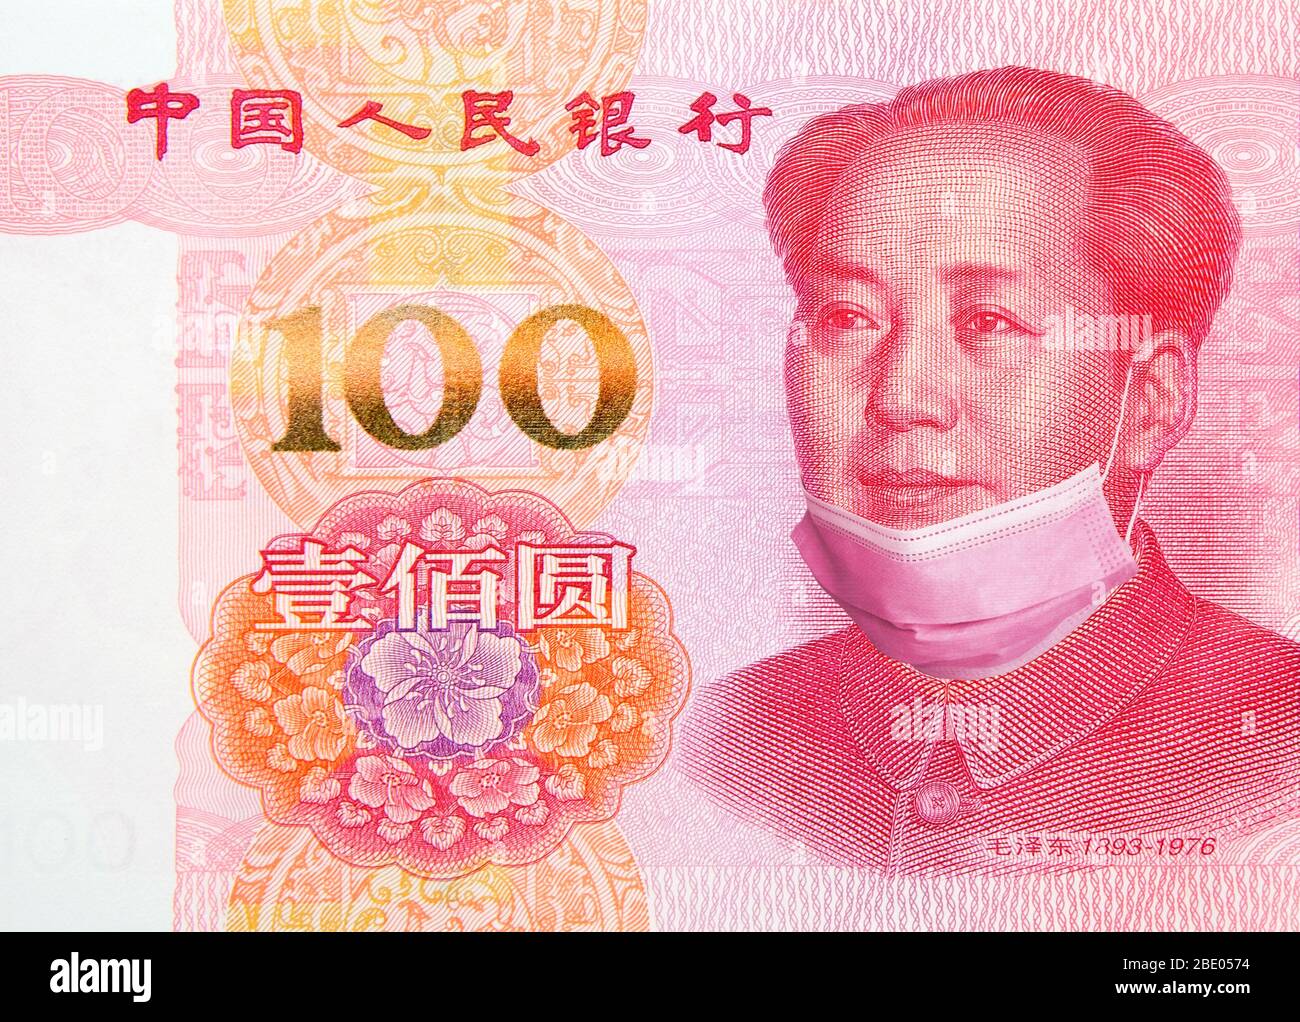 China is ending coronavirus lockdown and quarantine. 100 Yuan banknote with face mask pulled down. China ease restrictions goes to Economic recovery Stock Photo